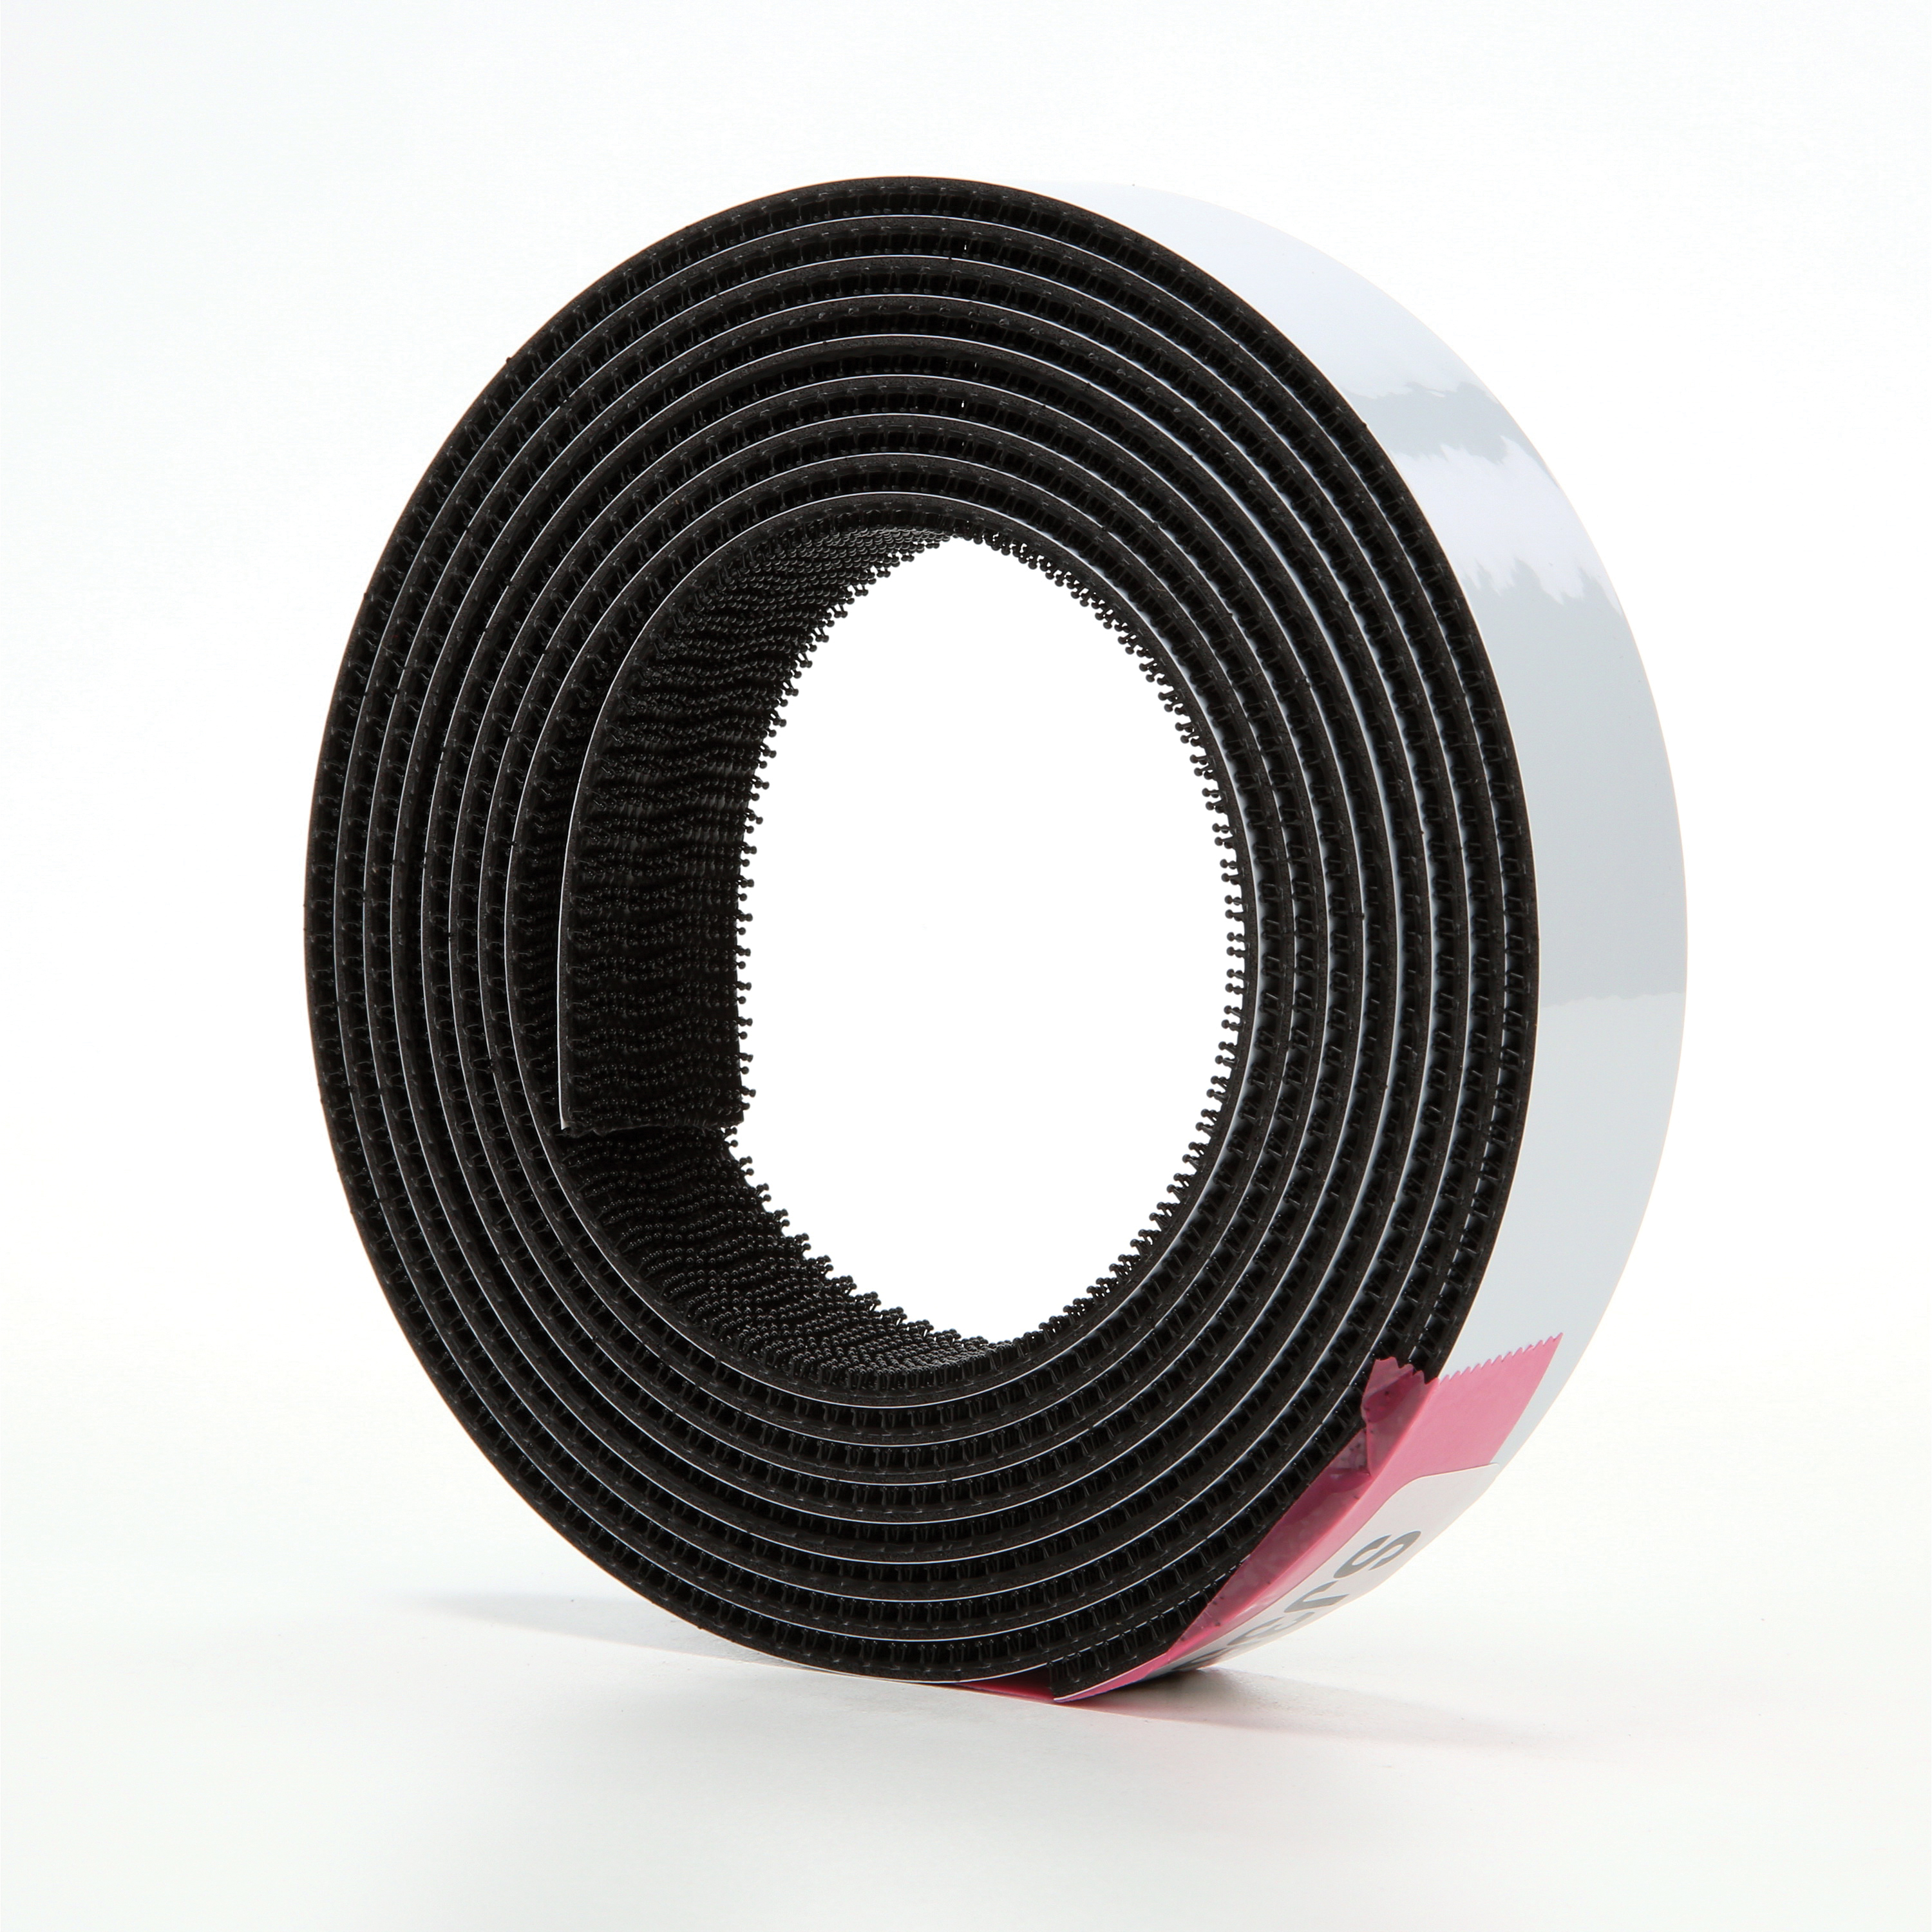 Dual Lock™ 048011-57919 Mushroom Shaped Reclosable Hook and Loop Fastener Tape, 50 yd L x 6 in W, 0.23 in THK Engaged, Synthetic Rubber Adhesive, Polypropylene Backing, Black